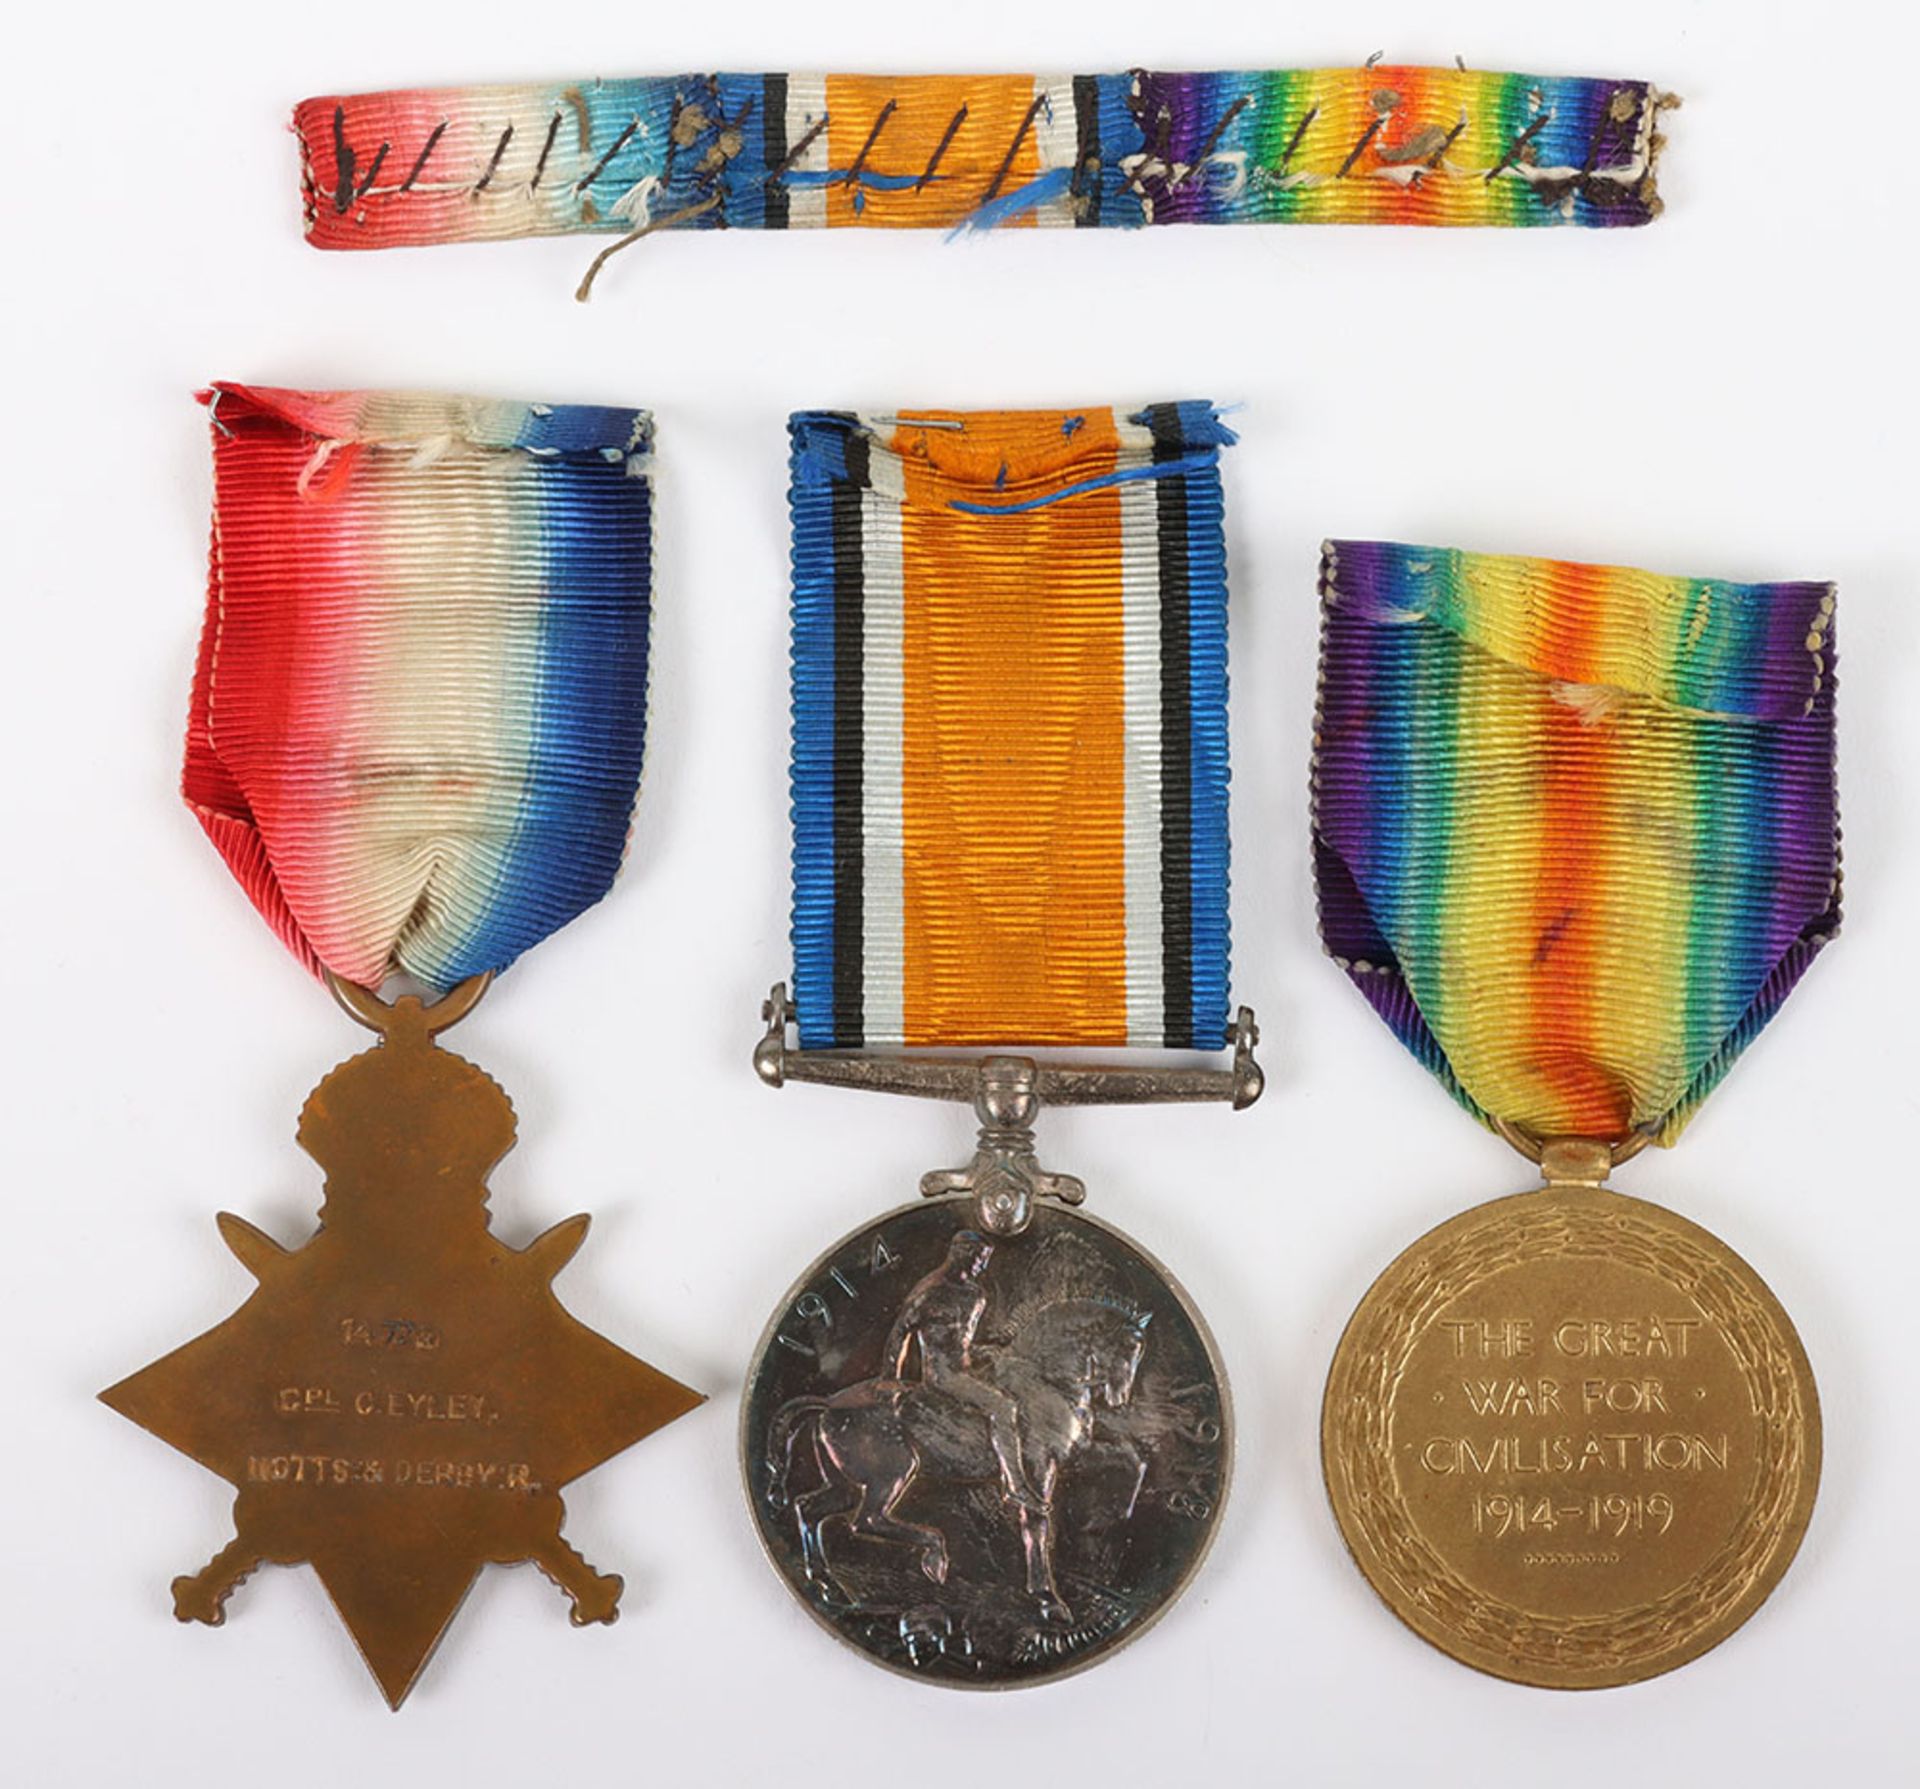 A Great War February 1916 killed in action 1914-15 star medal trio to a coal miner in the 10th Batta - Image 4 of 5